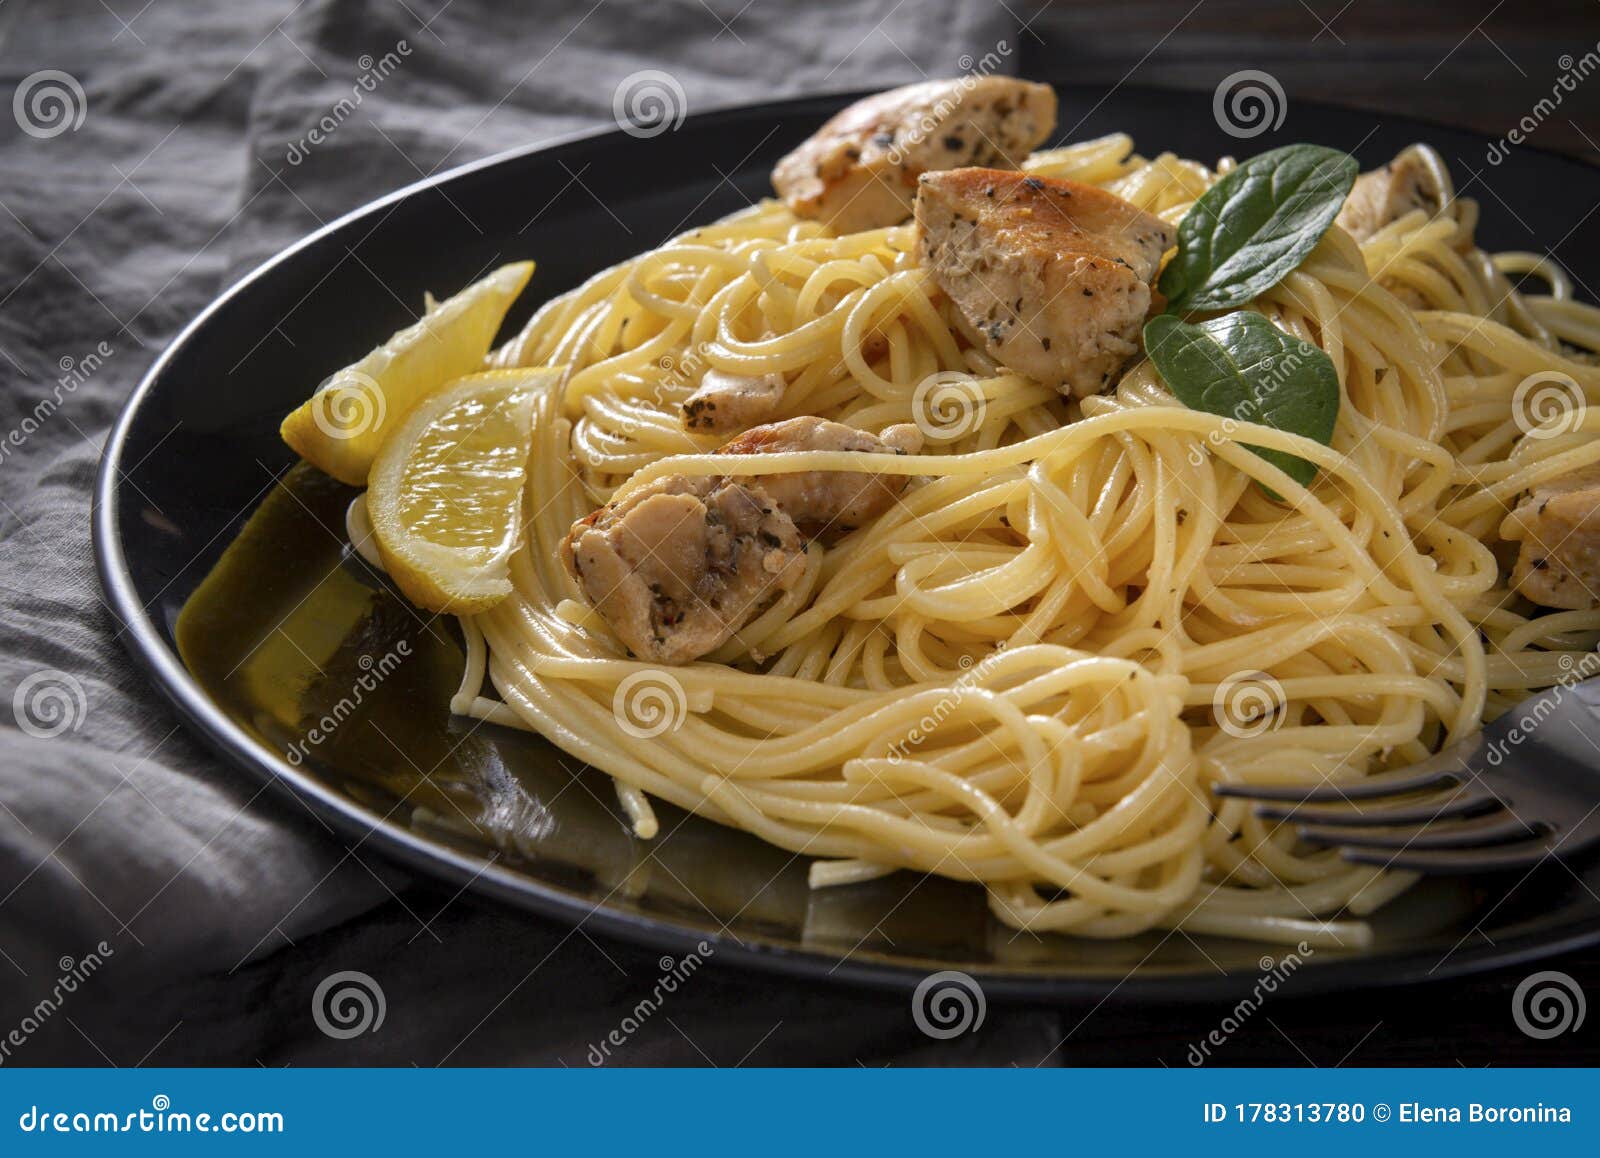 Spaghetti with Chicken on a Black Plate , Napkin, on a Dark Wooden ...